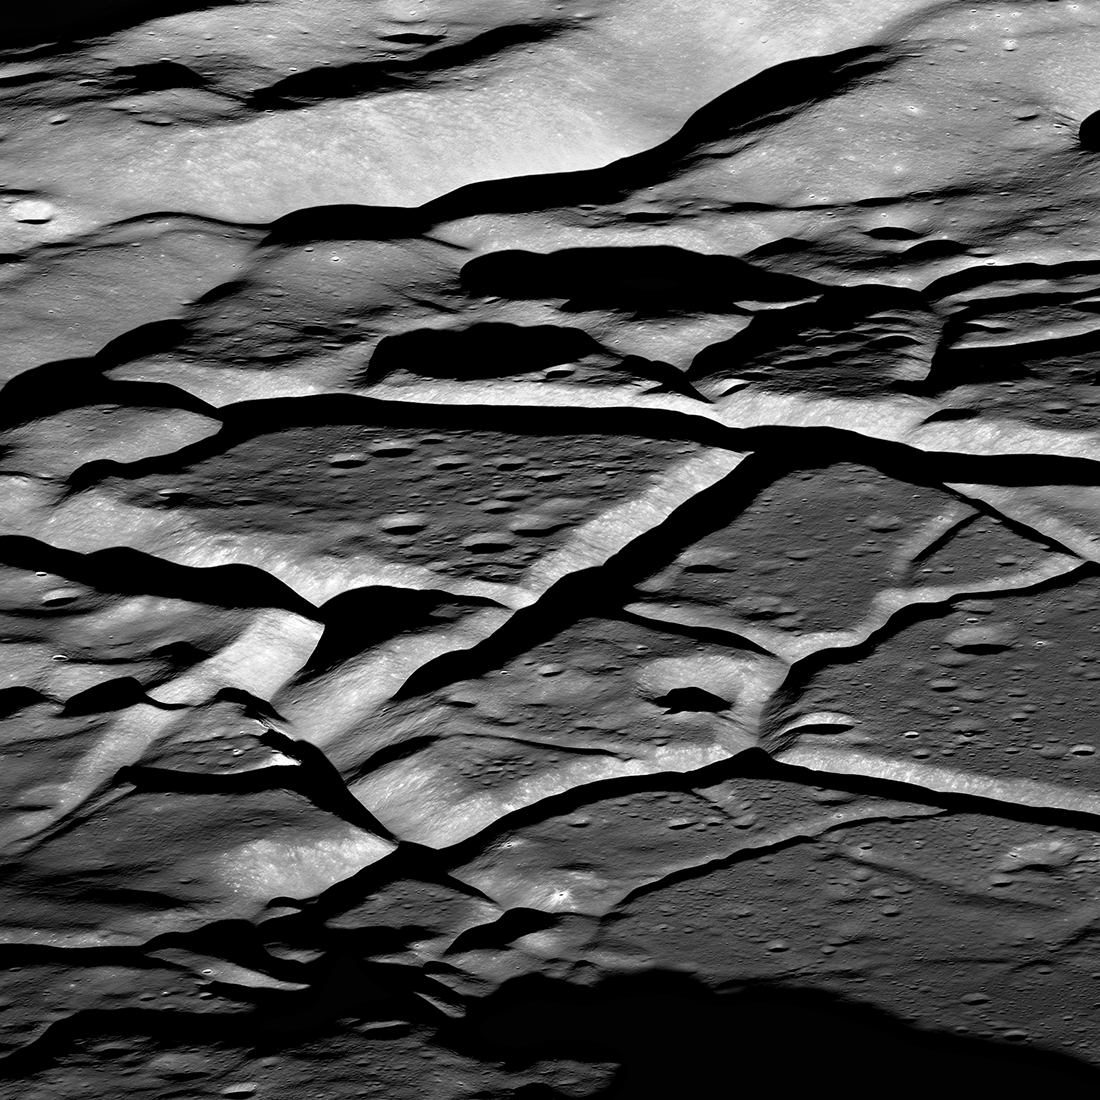 Deep grooves in gray lunar terrain. The effect looks similar to cracked or wrinkled clay.